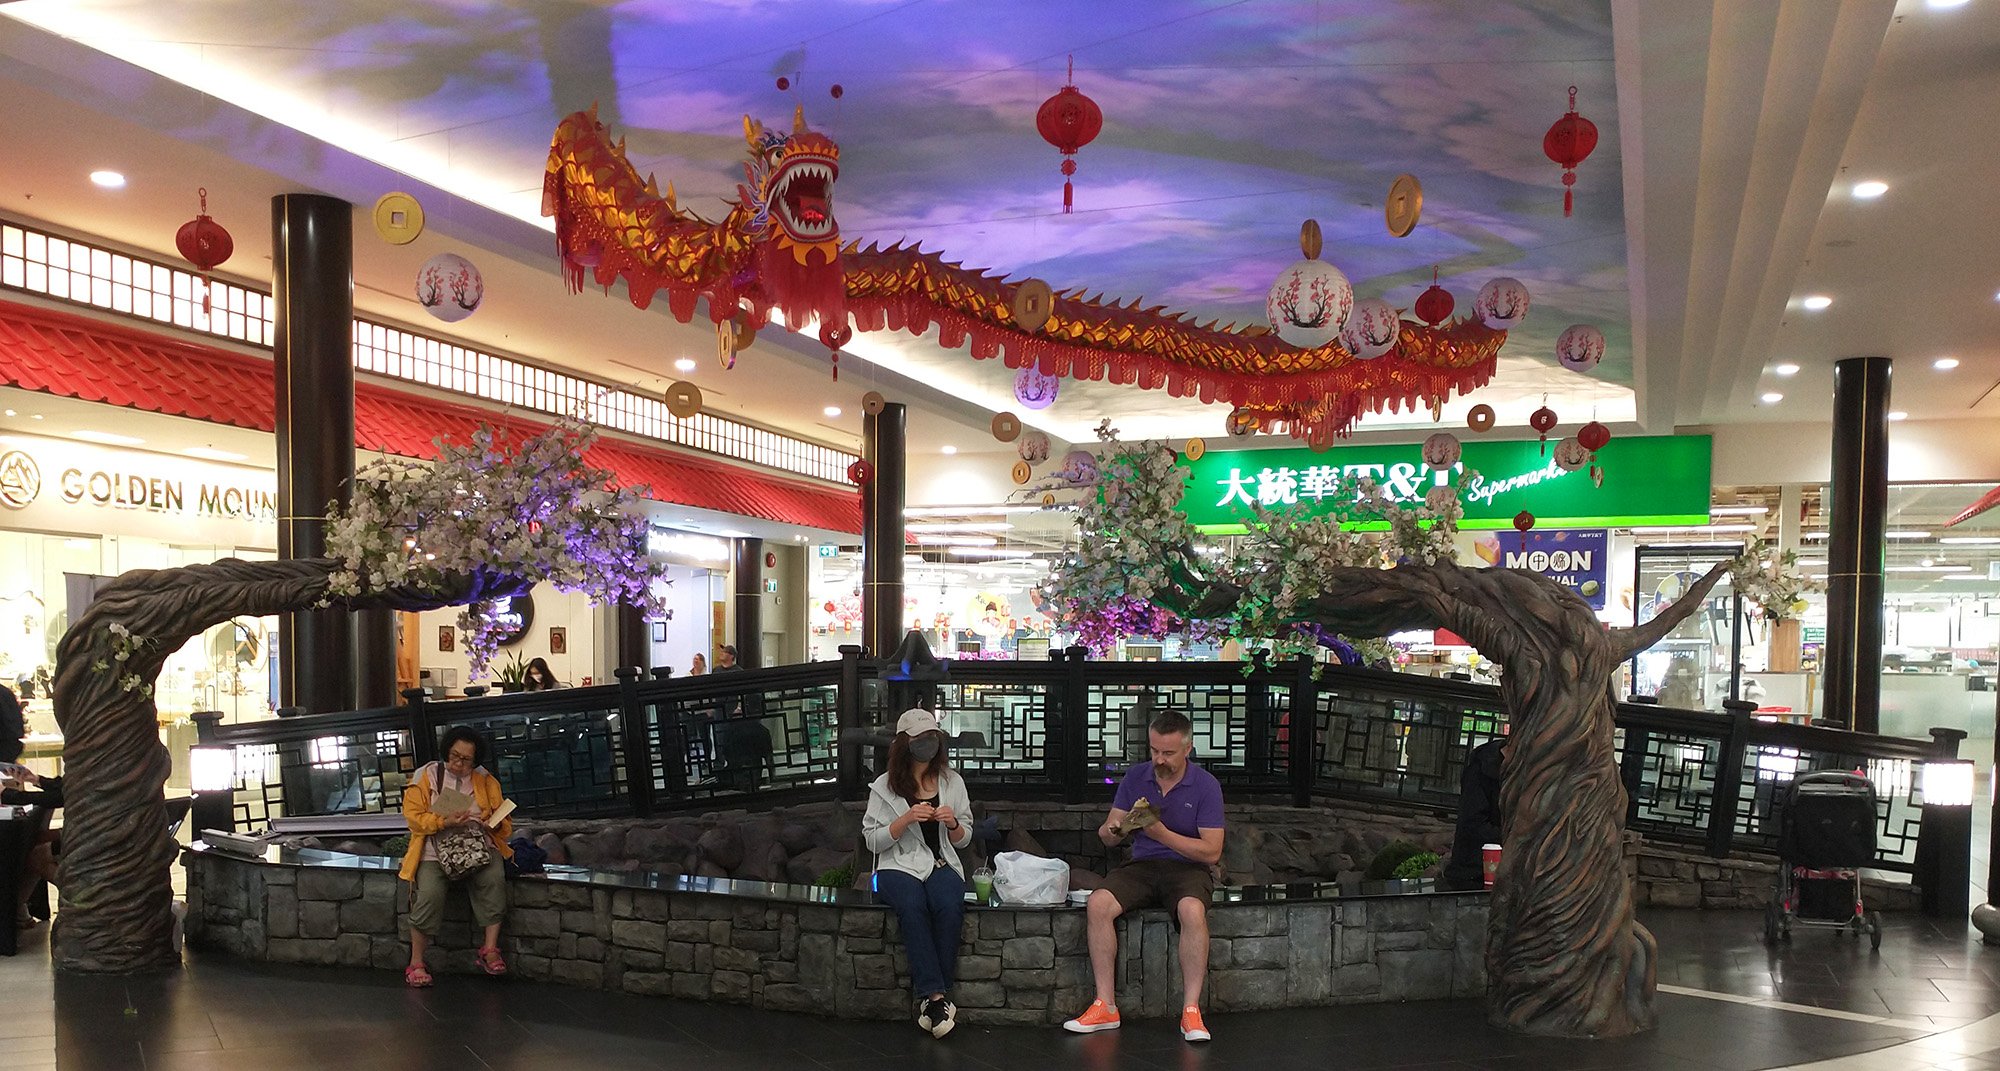 Mall is so big it has its own Chinatown.